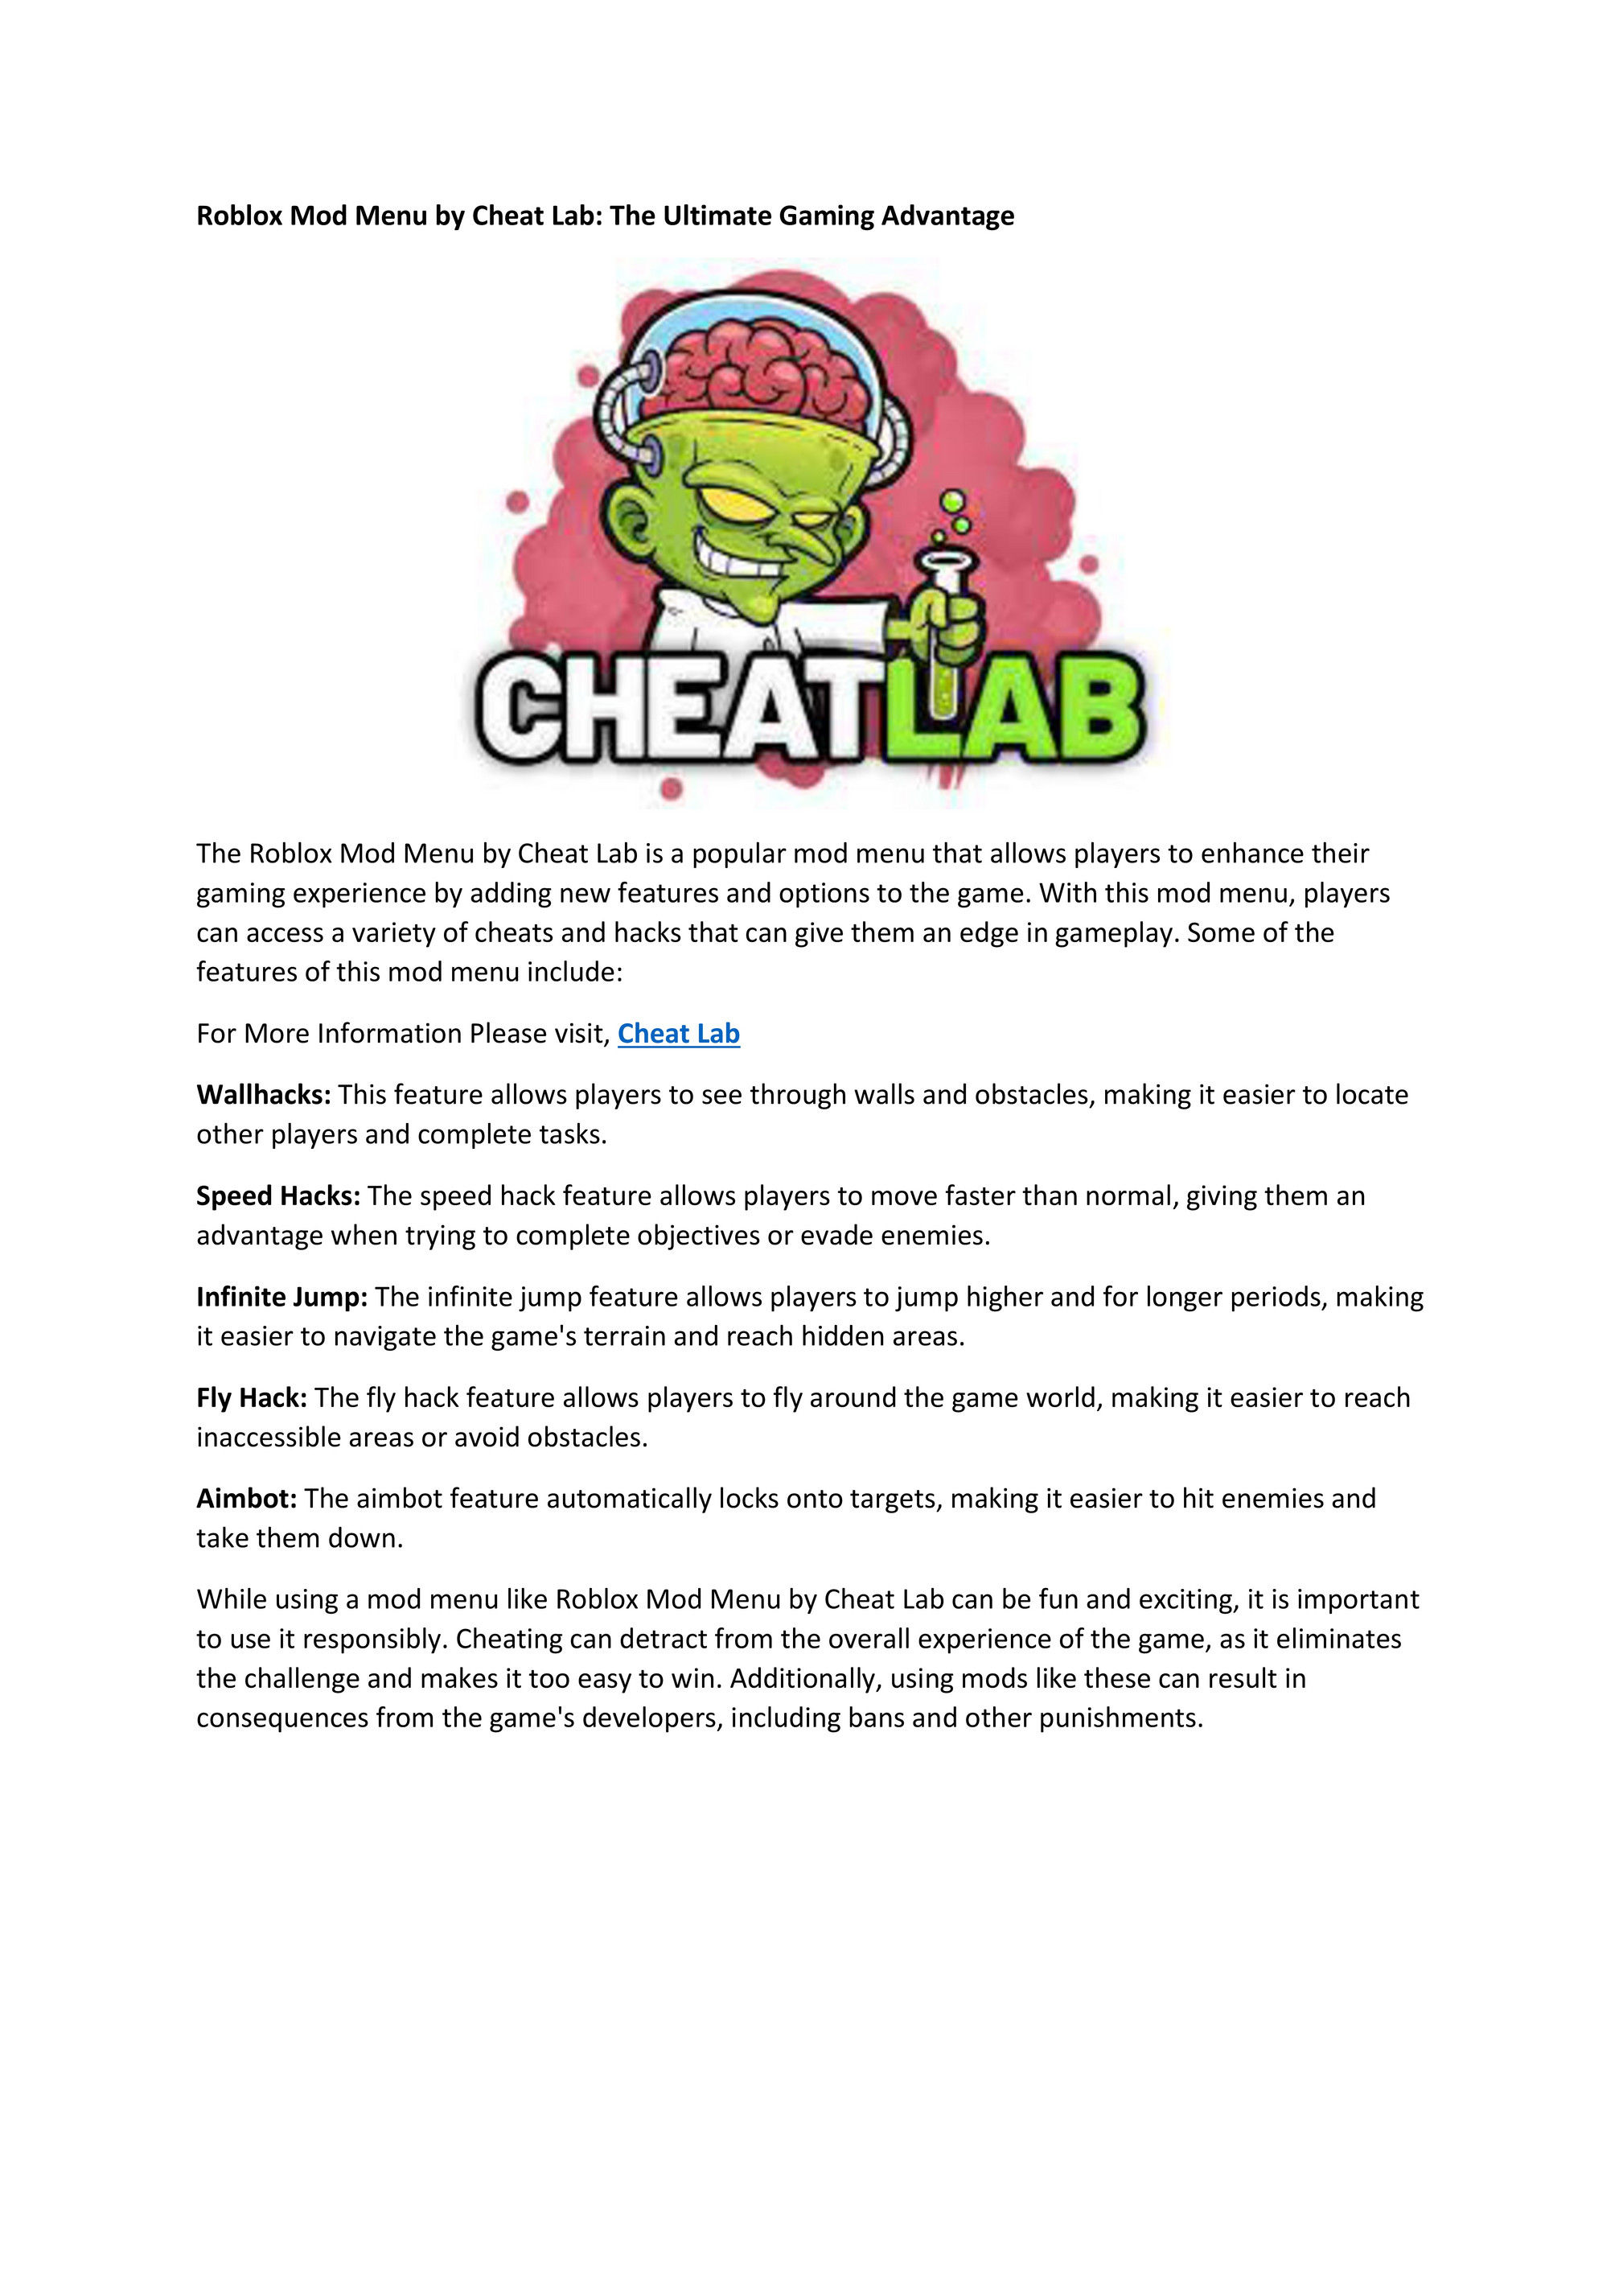 My publications - Roblox-Mod-Menu-by-Cheat-Lab-The-Ultimate-Gaming